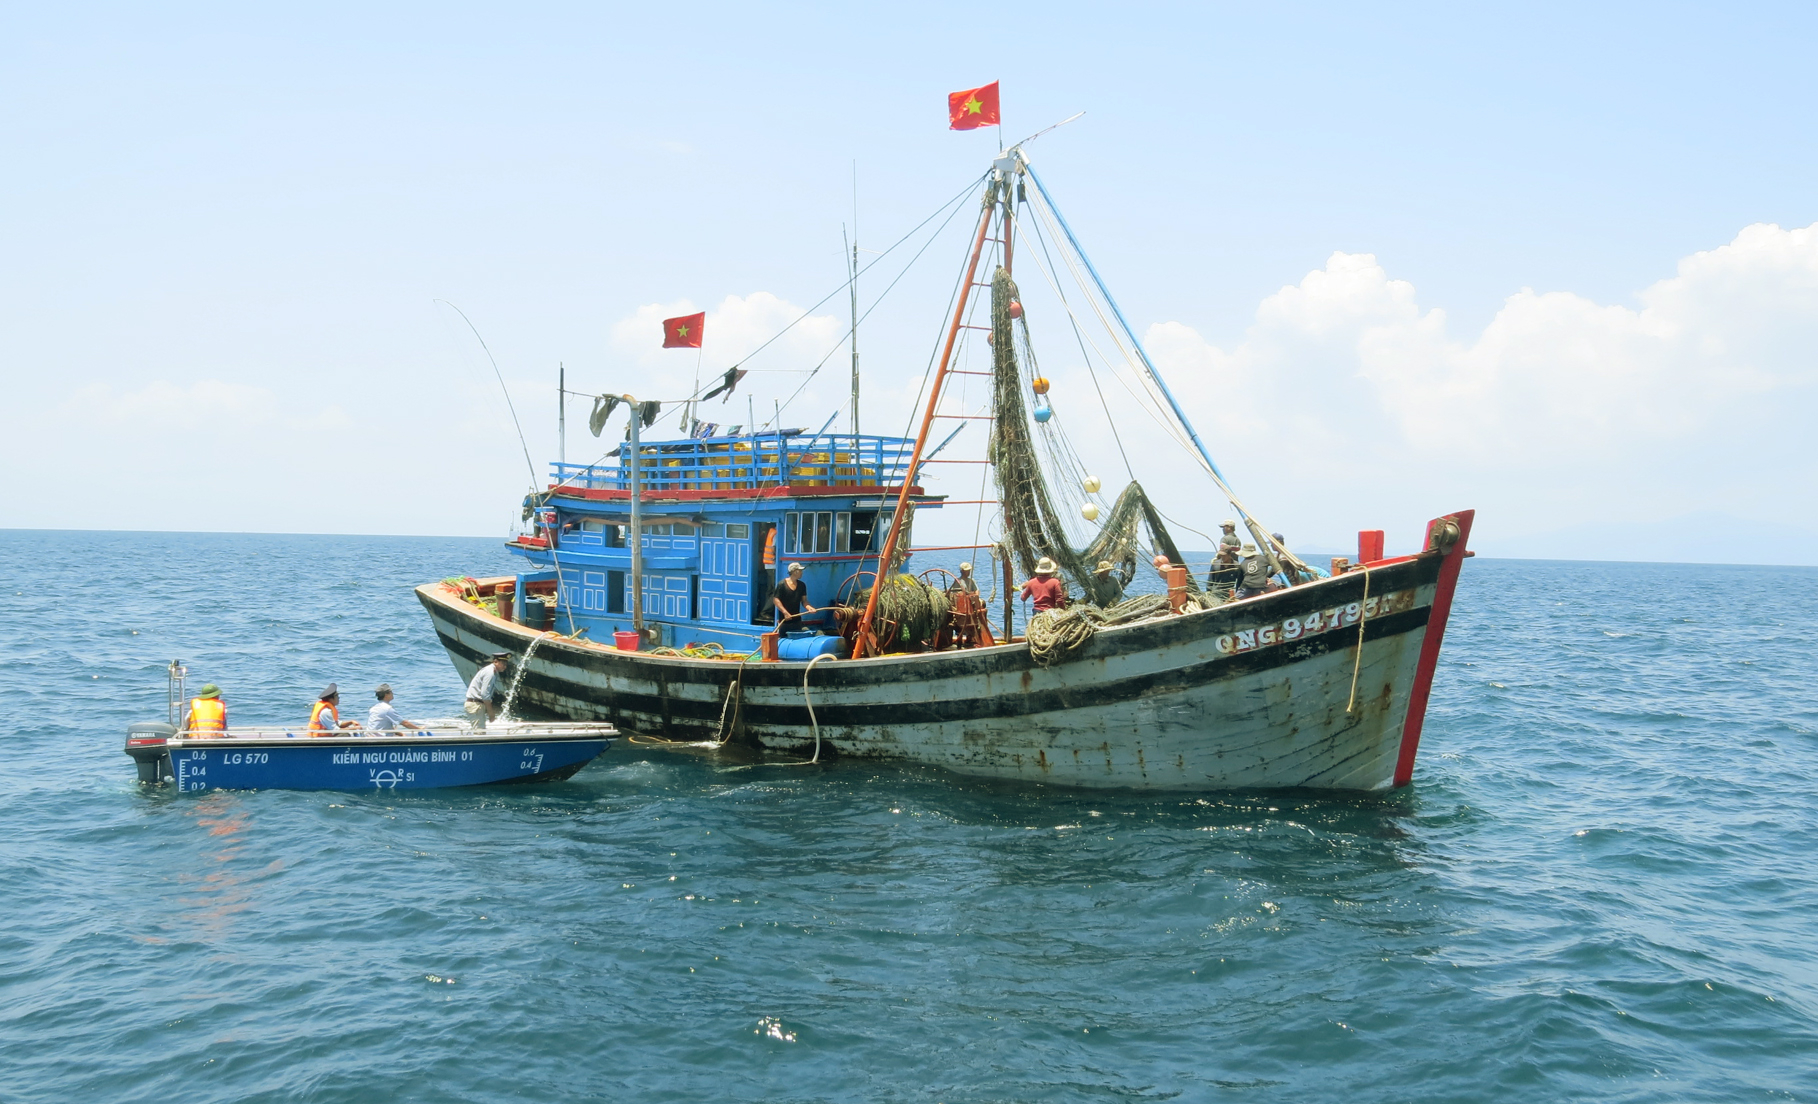 Urgently establishing the Fisheries Control Force and strengthening the means of operation is a requirement for Quang Binh province. Photo: A.T.